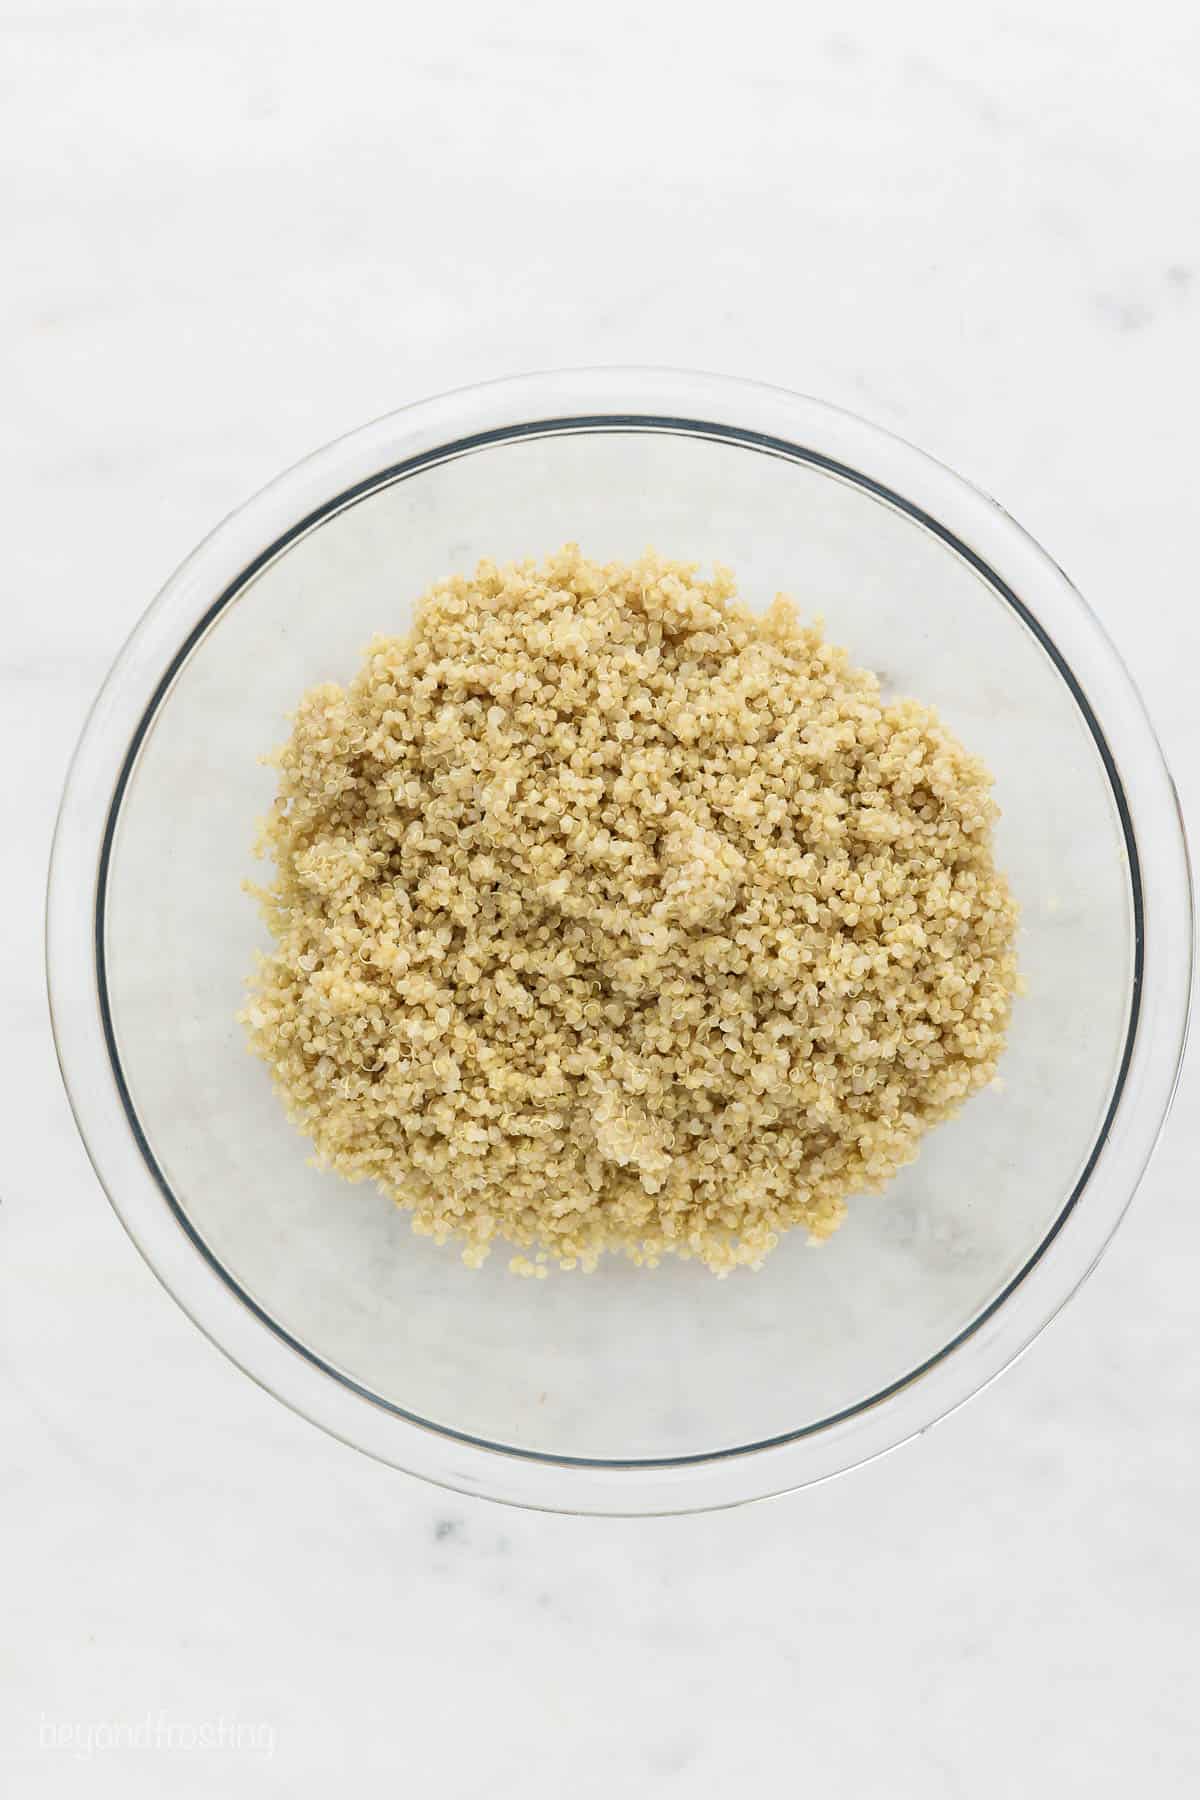 a clear glass bowl of cooked quinoa